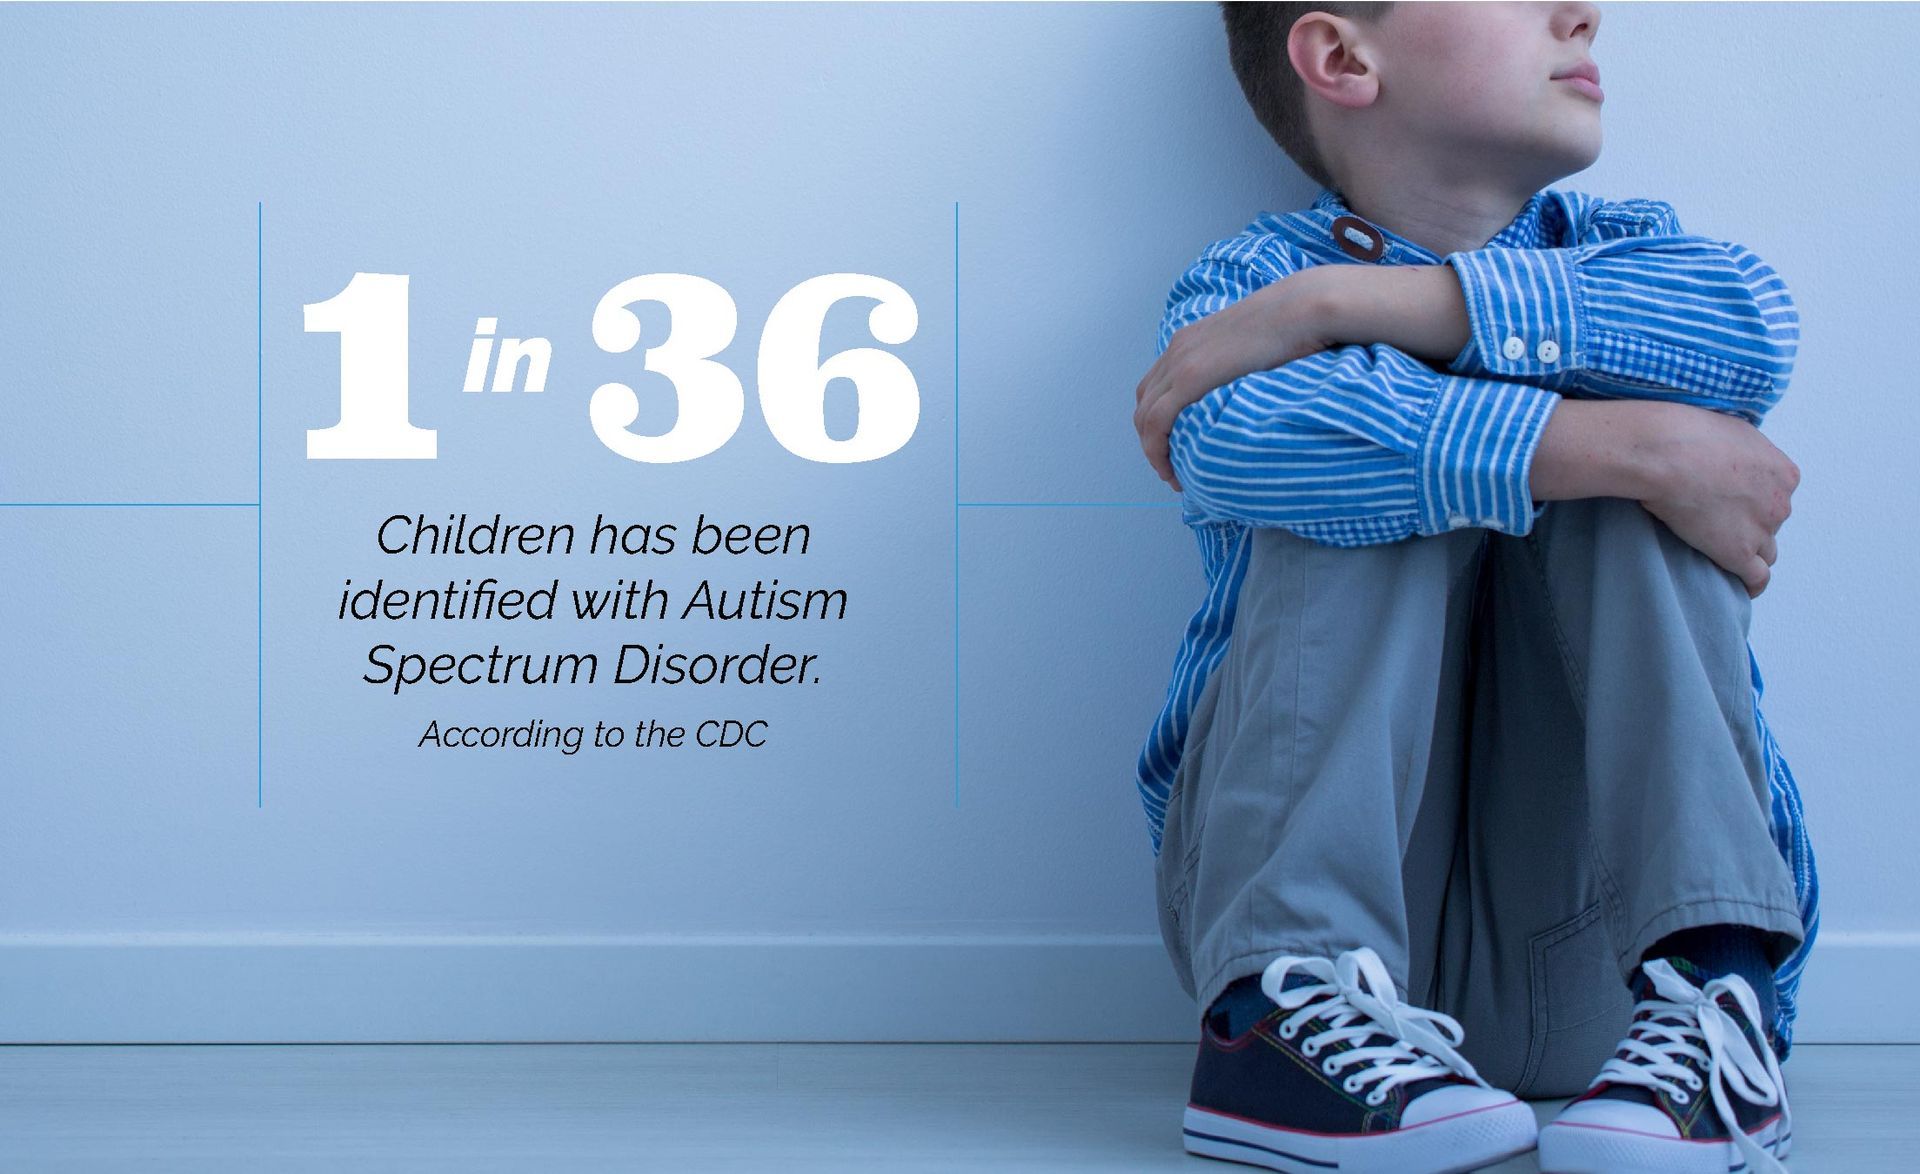 1 in 36 children has been identified with Autism Spectrum Disorder - according to the CDC